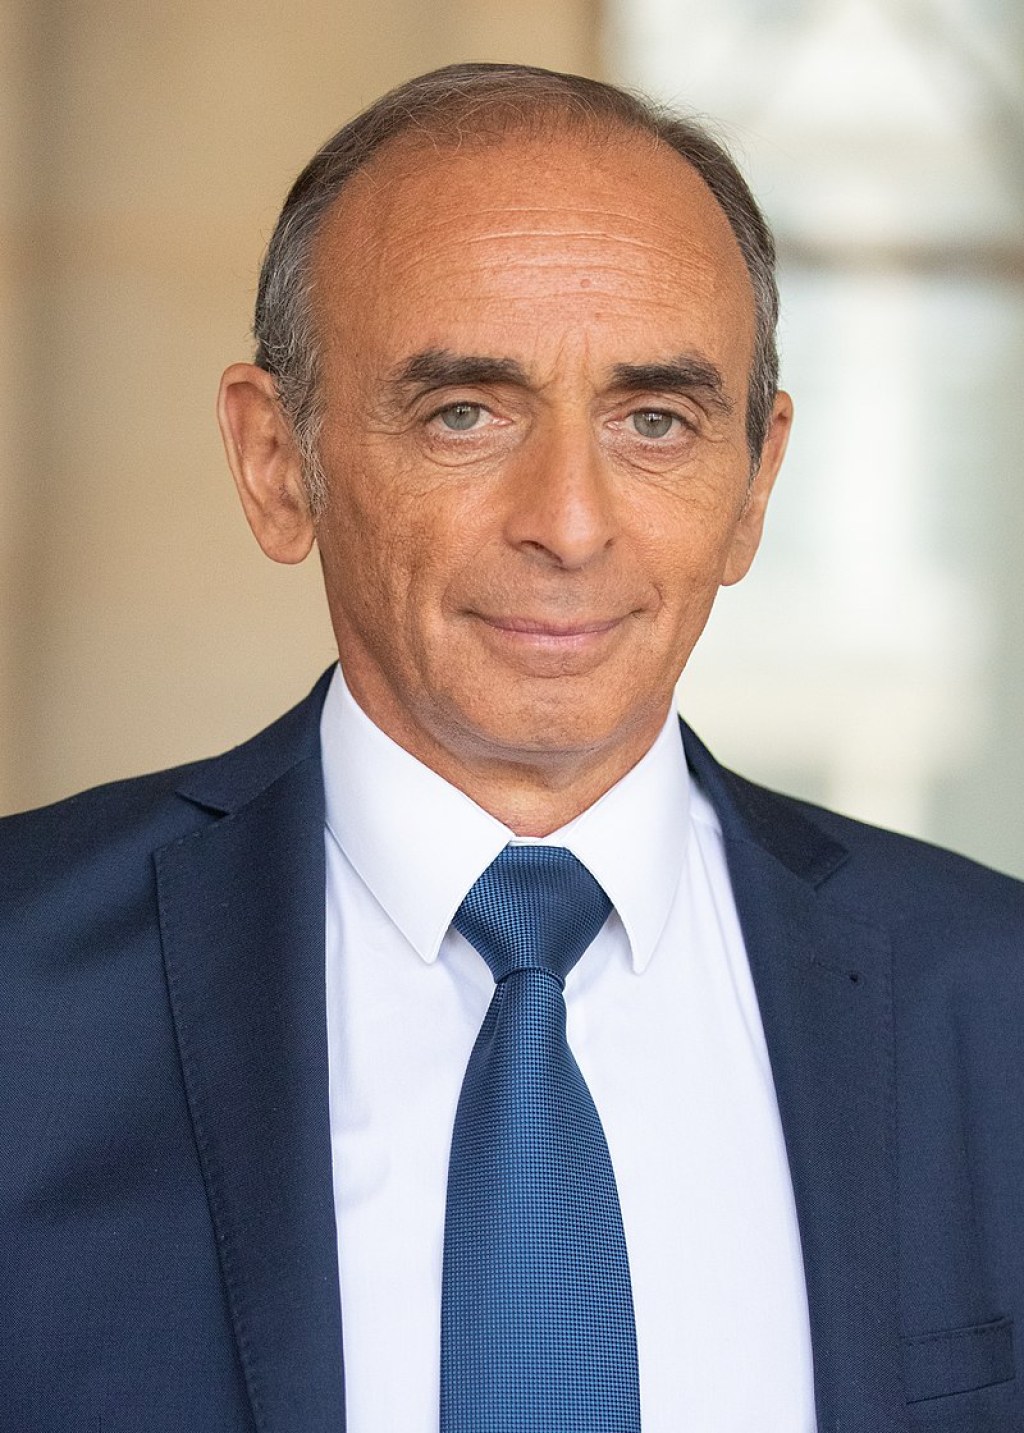 french political journalists - Éric Zemmour - Wikipedia